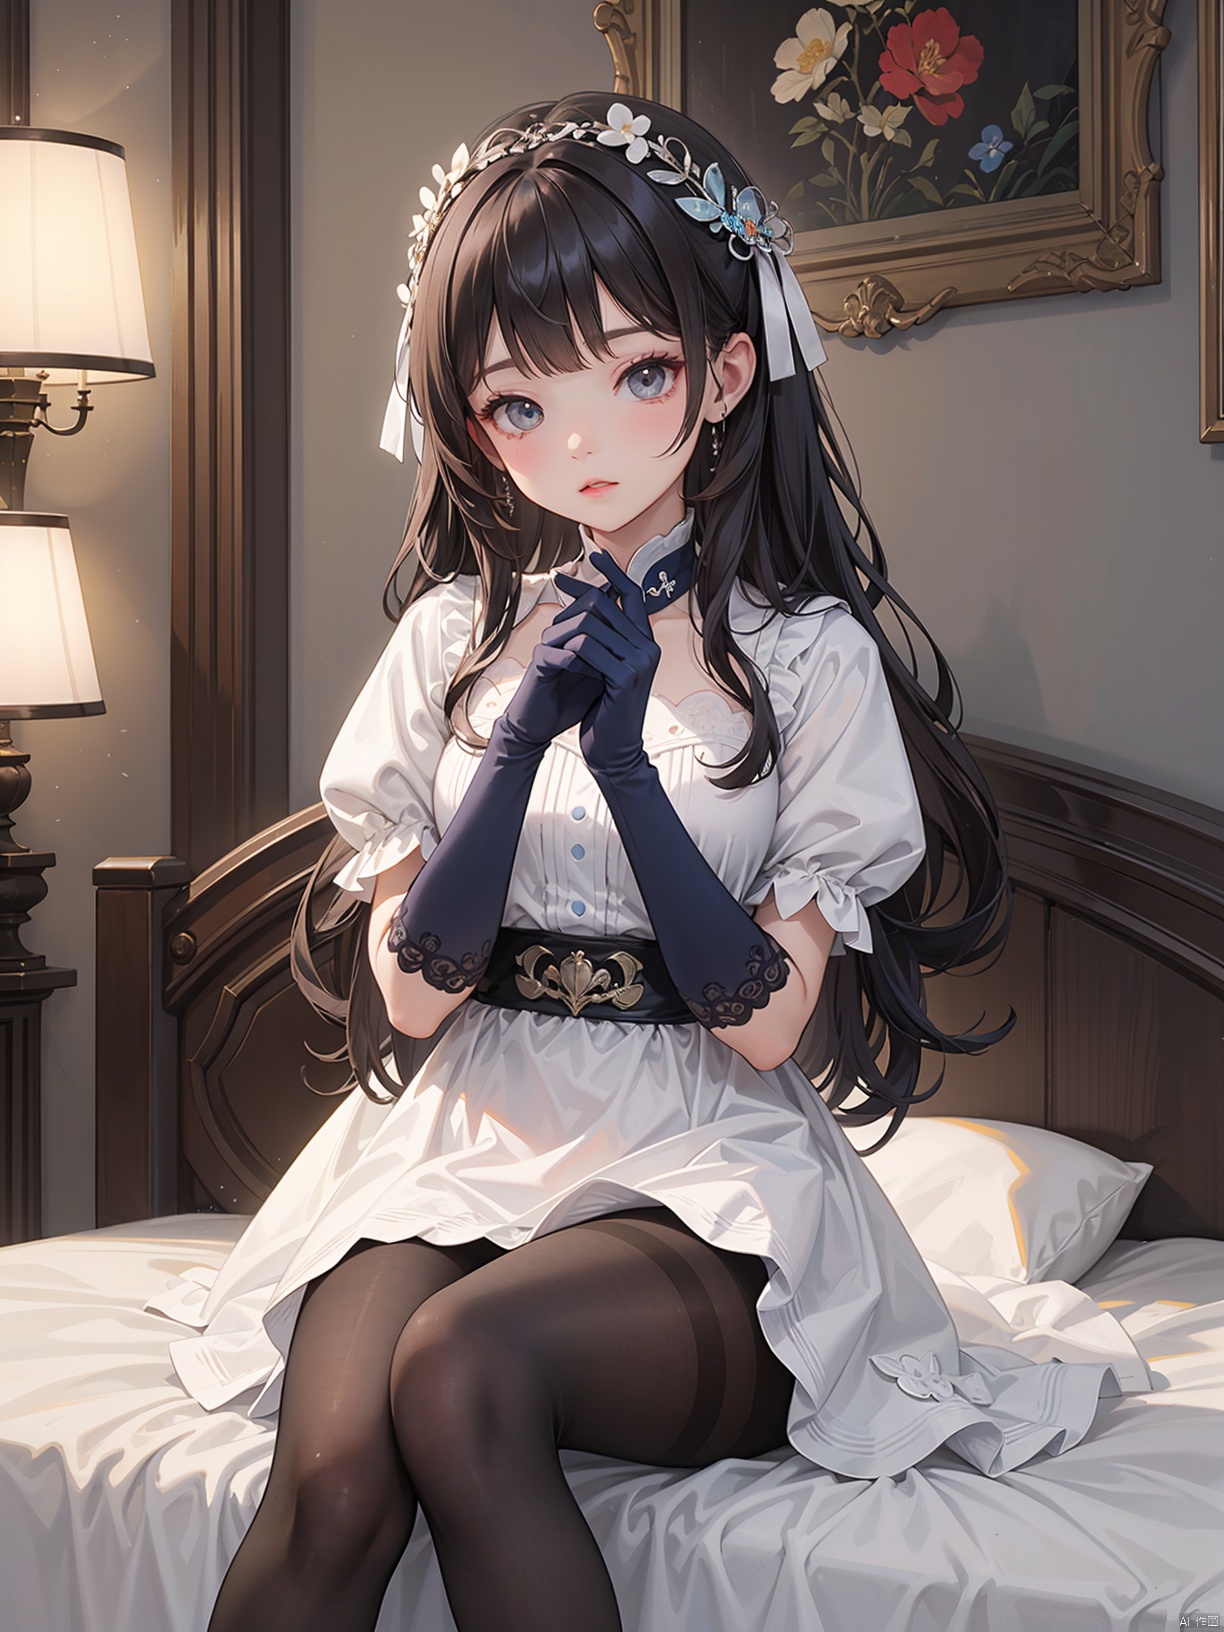  A woman in white dress sits on the bed with a butterfly on her arm, a detailed painting, Fan Qi, soft lighting, fantasy, Kikukawa Yingzan, sots art, rococo, with long hair and blue gloves, sitting cross-legged on the bed, Du Qiong, pantyhose